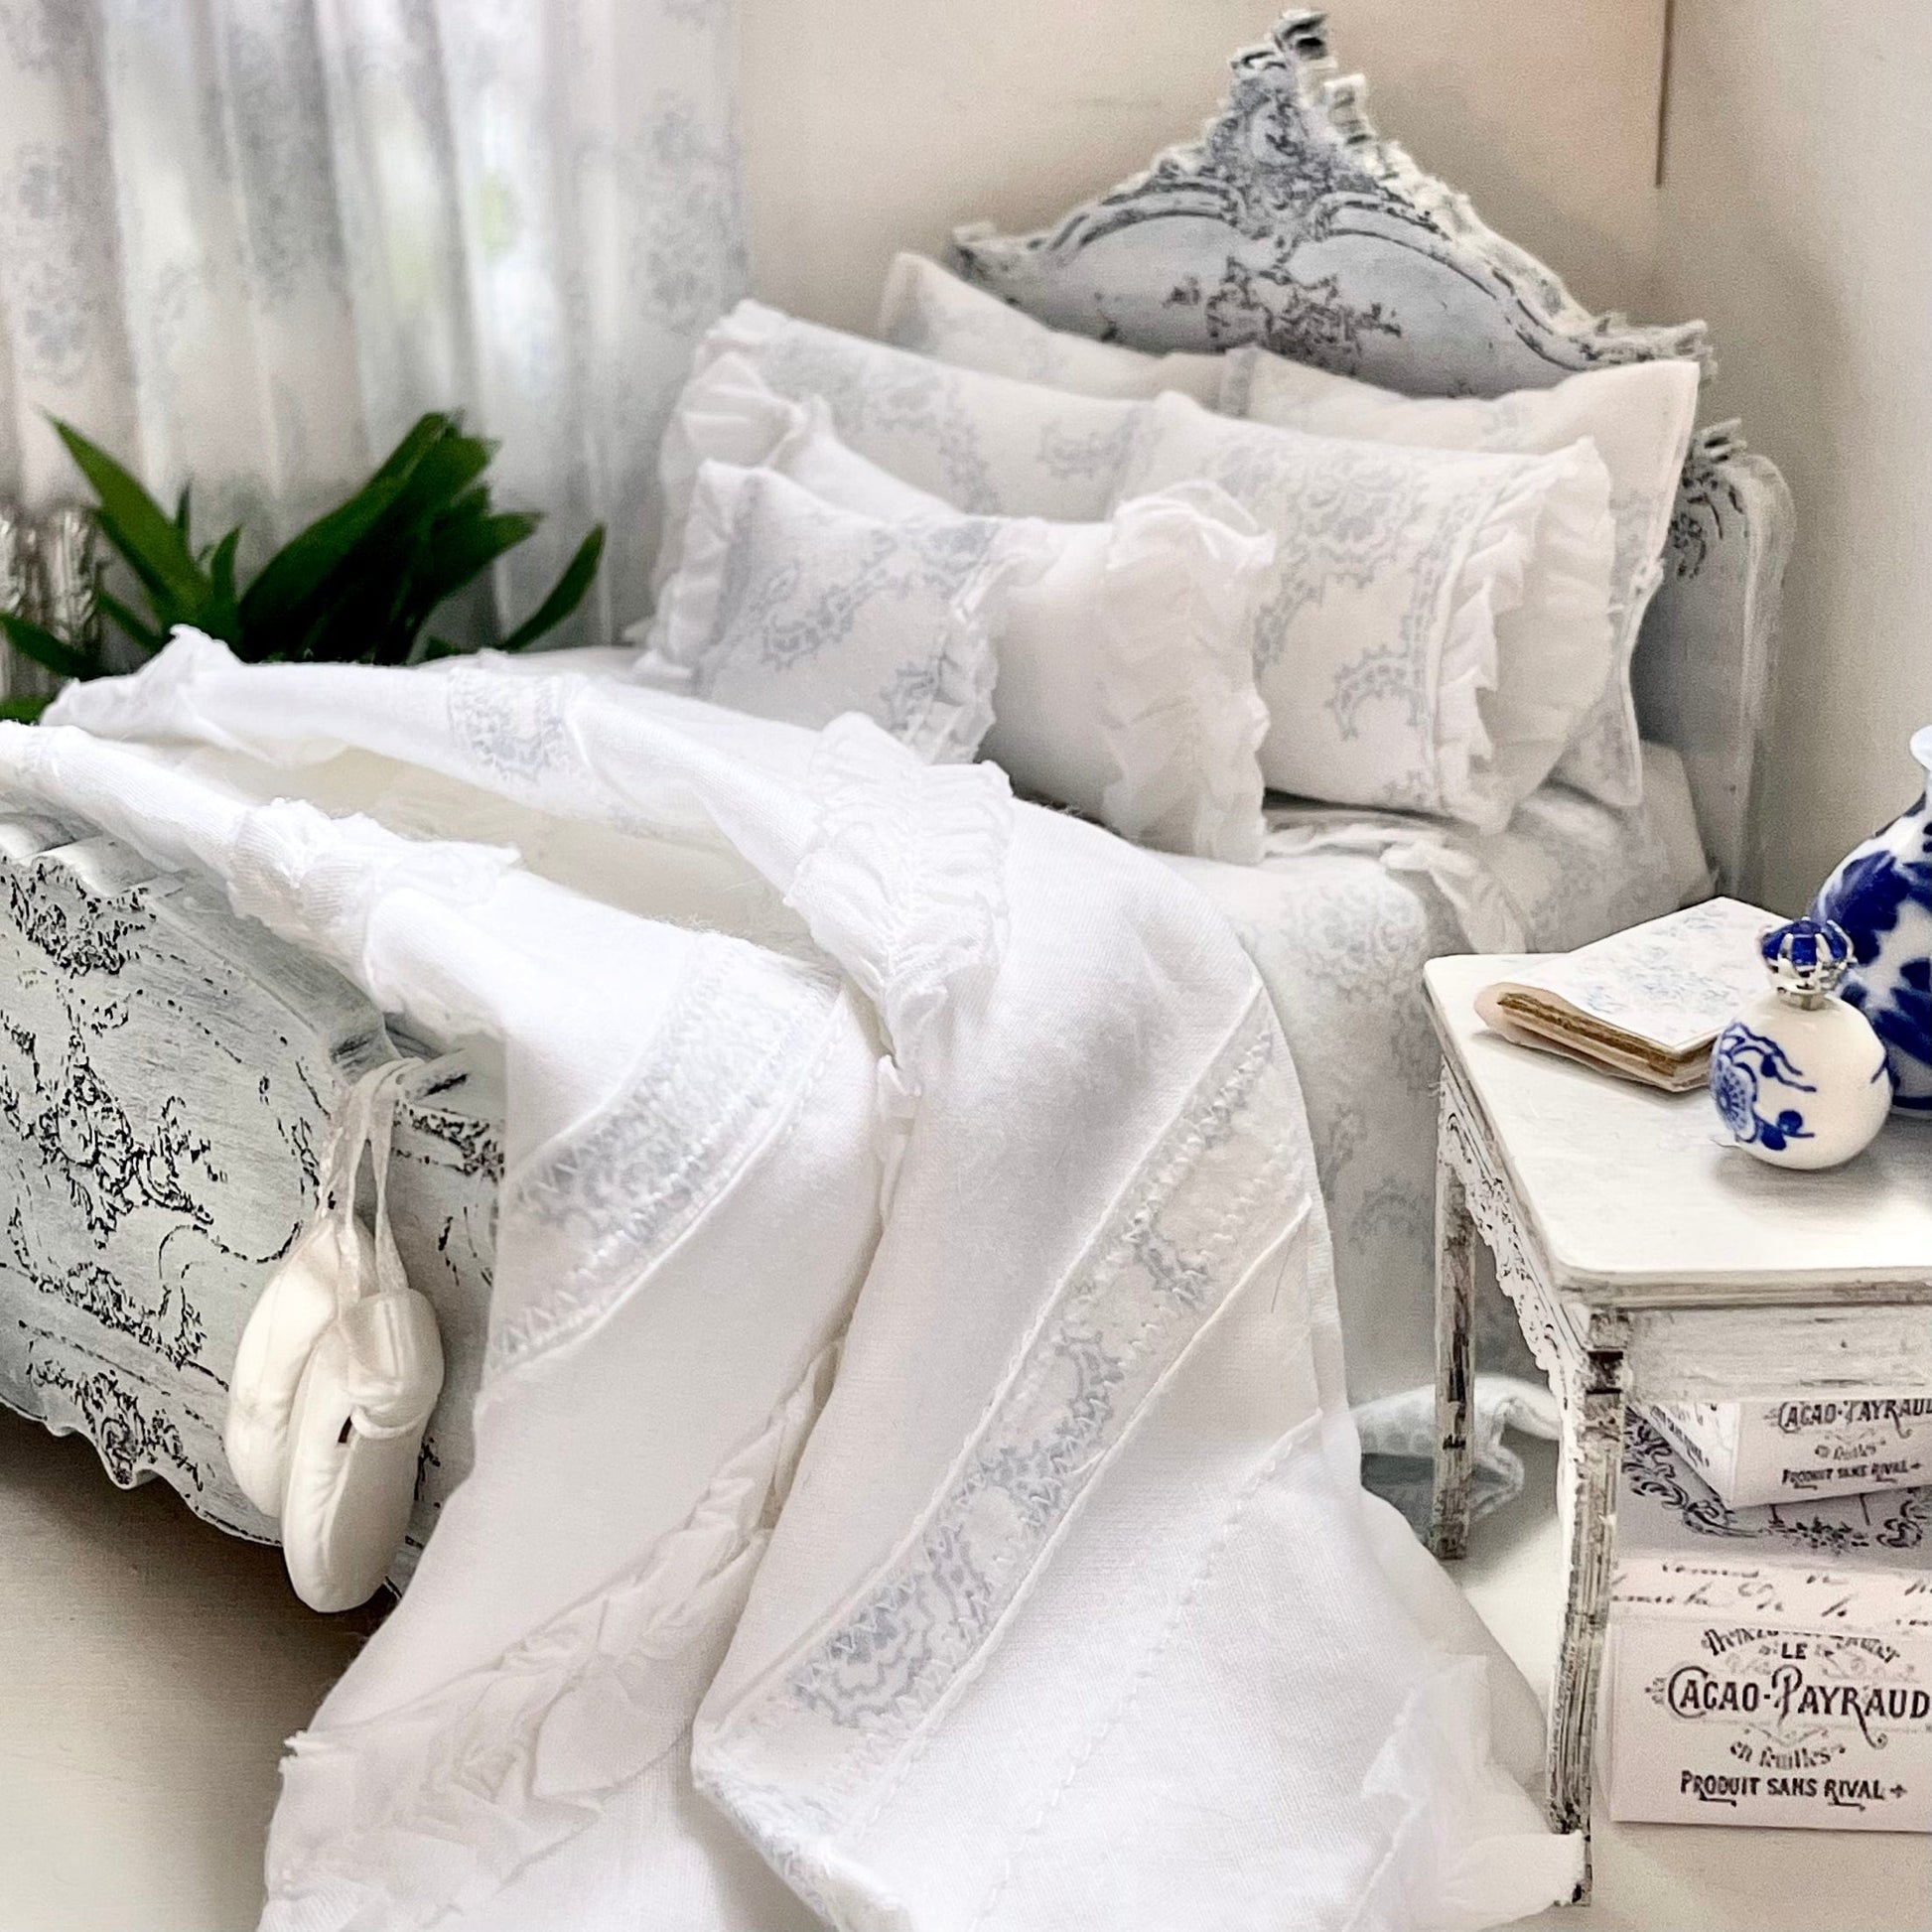 Chantallena Doll House Copy of Shabby Cottage | Eight Piece Shabby White Cotton Bed Set with Blue Roses Trellis | Blue Rose Trellis